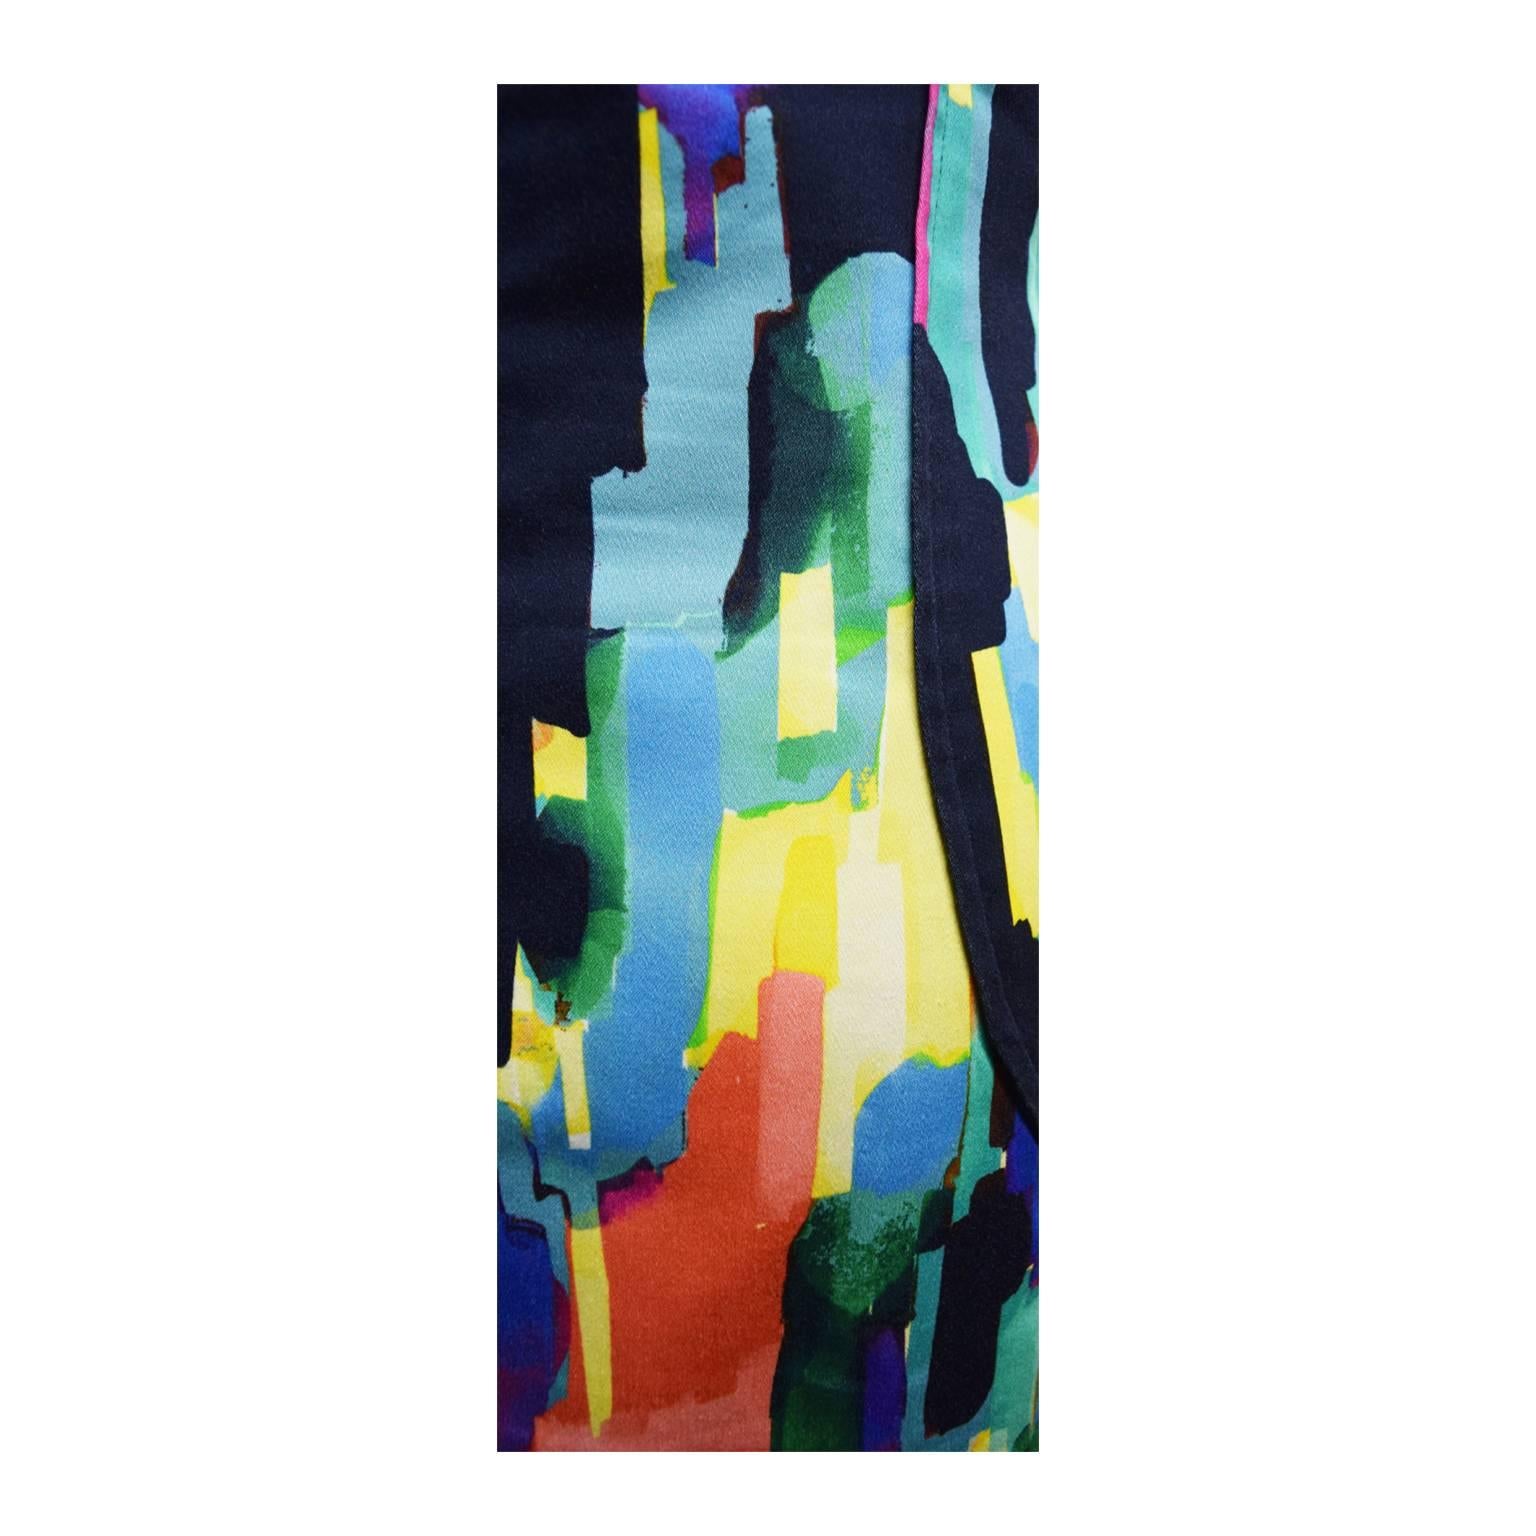 Lela Rose Multicolored Abstract Paint Stroke Printed Sheath Dress  In Excellent Condition For Sale In Henrico, VA